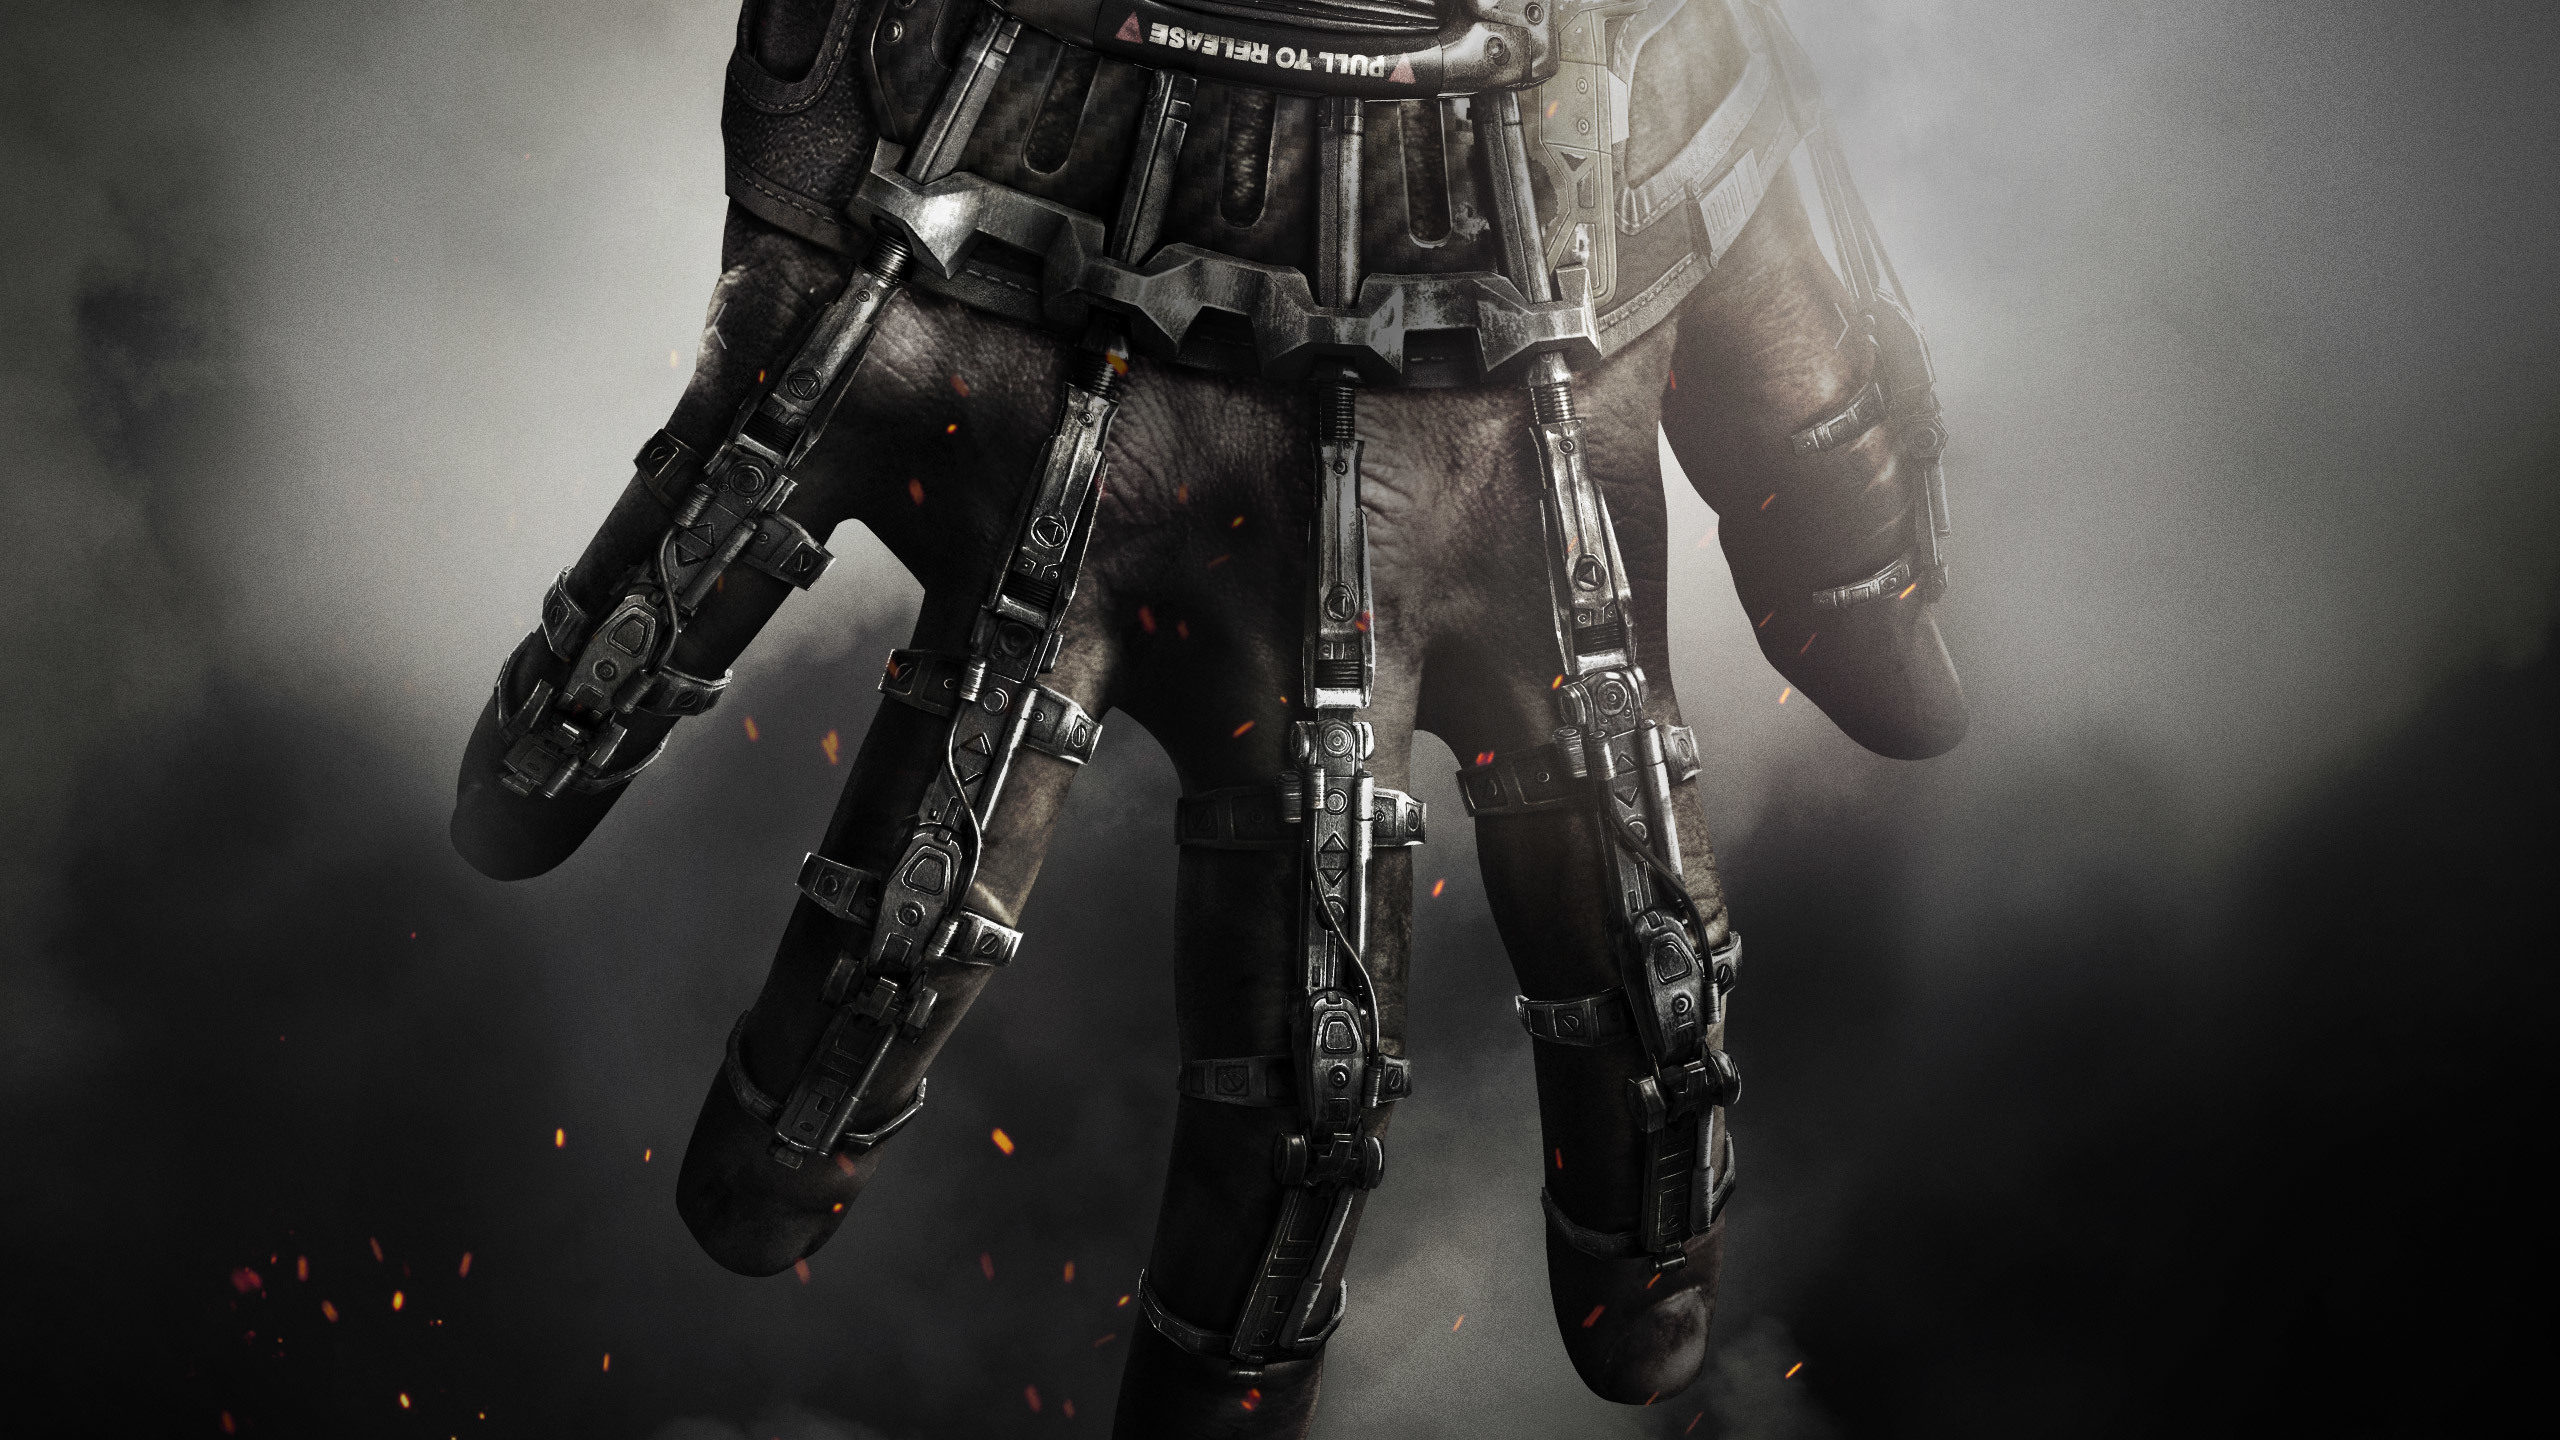 Call Of Duty Advanced Warfare HD Wallpaper And Background Image